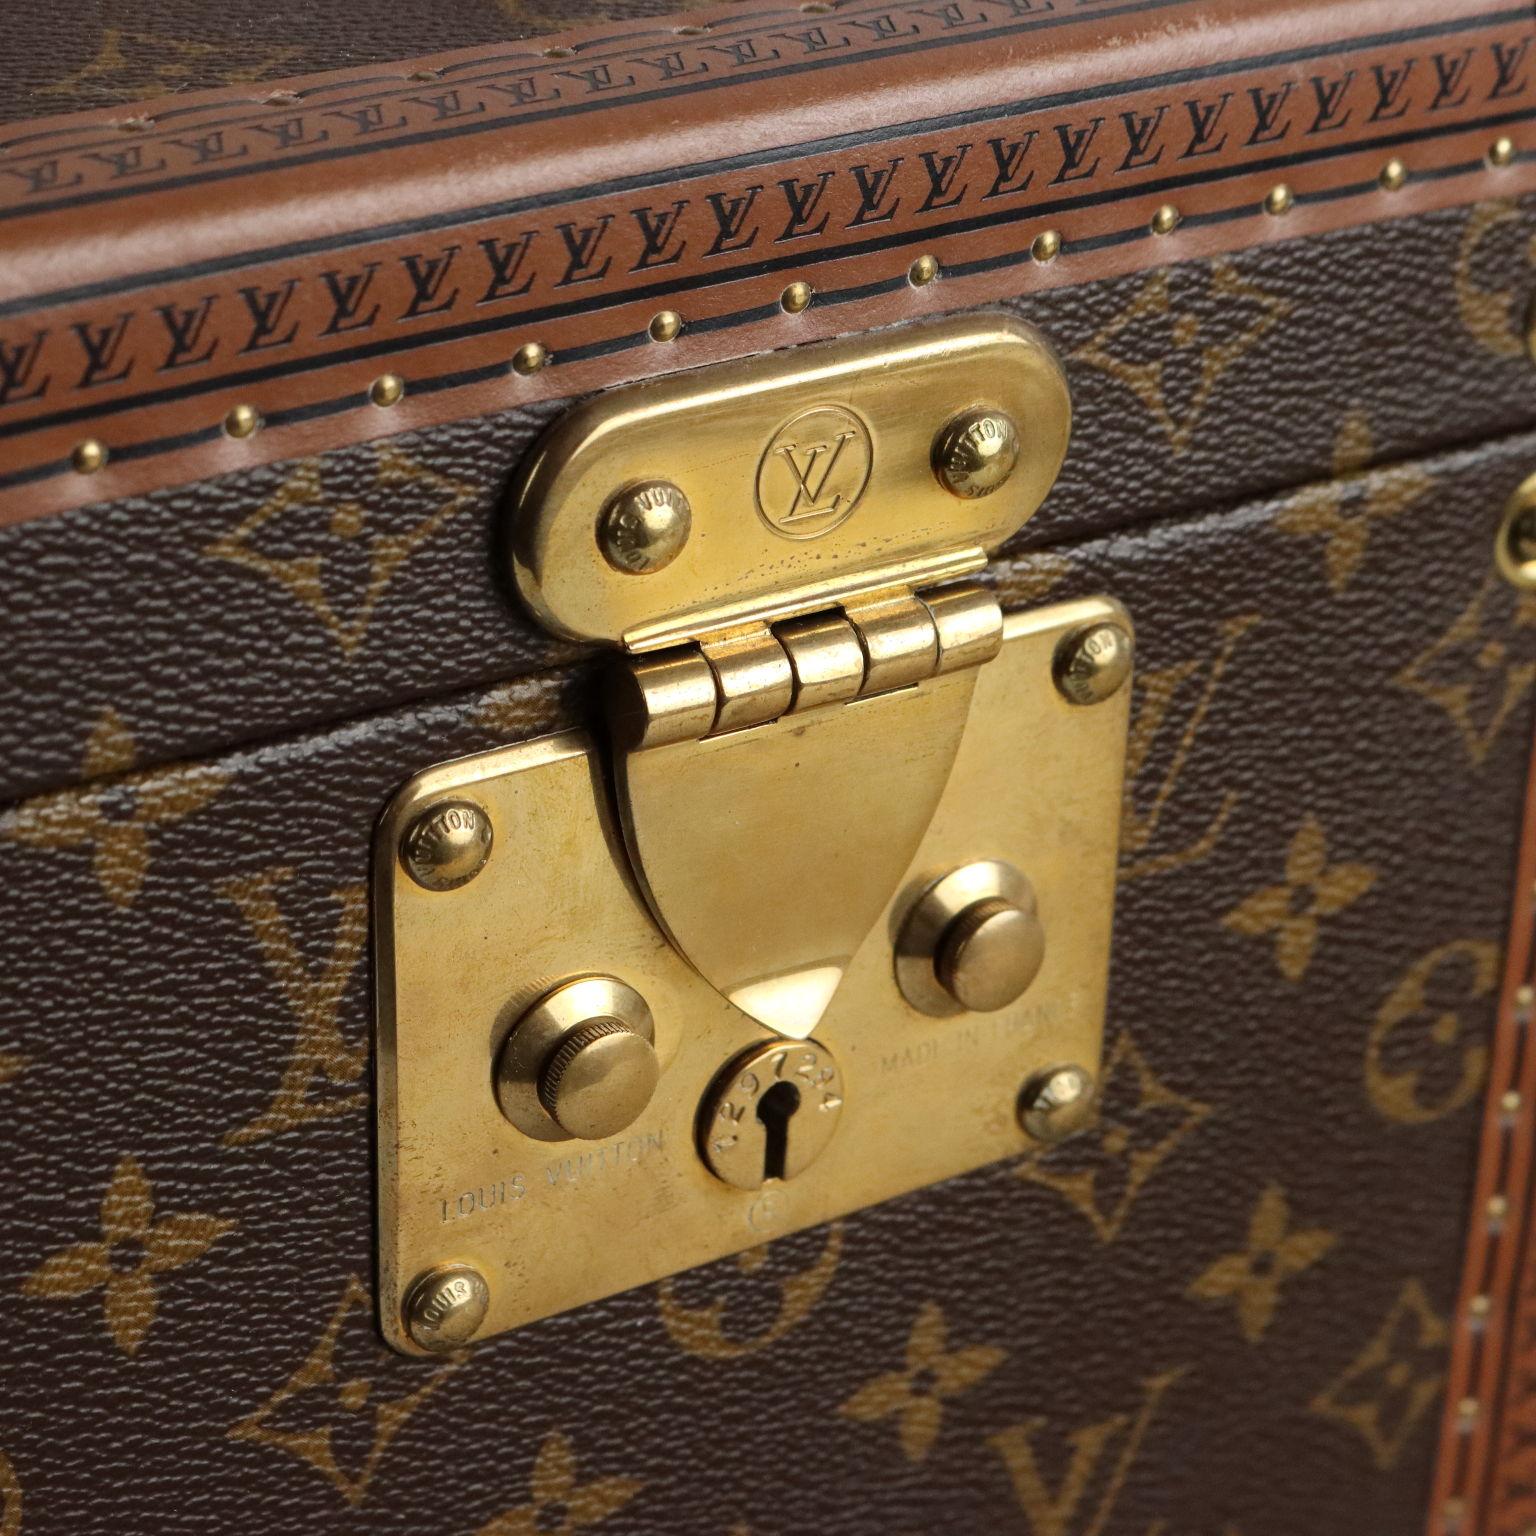 Louis Vuitton Beauty Case (Boîte à flacons) covered in Monogram canvas. The hardware is brass, the nails are branded. Interior fitted with mirror case, leather loops for bottles and original label bearing the unique product number (1079612).